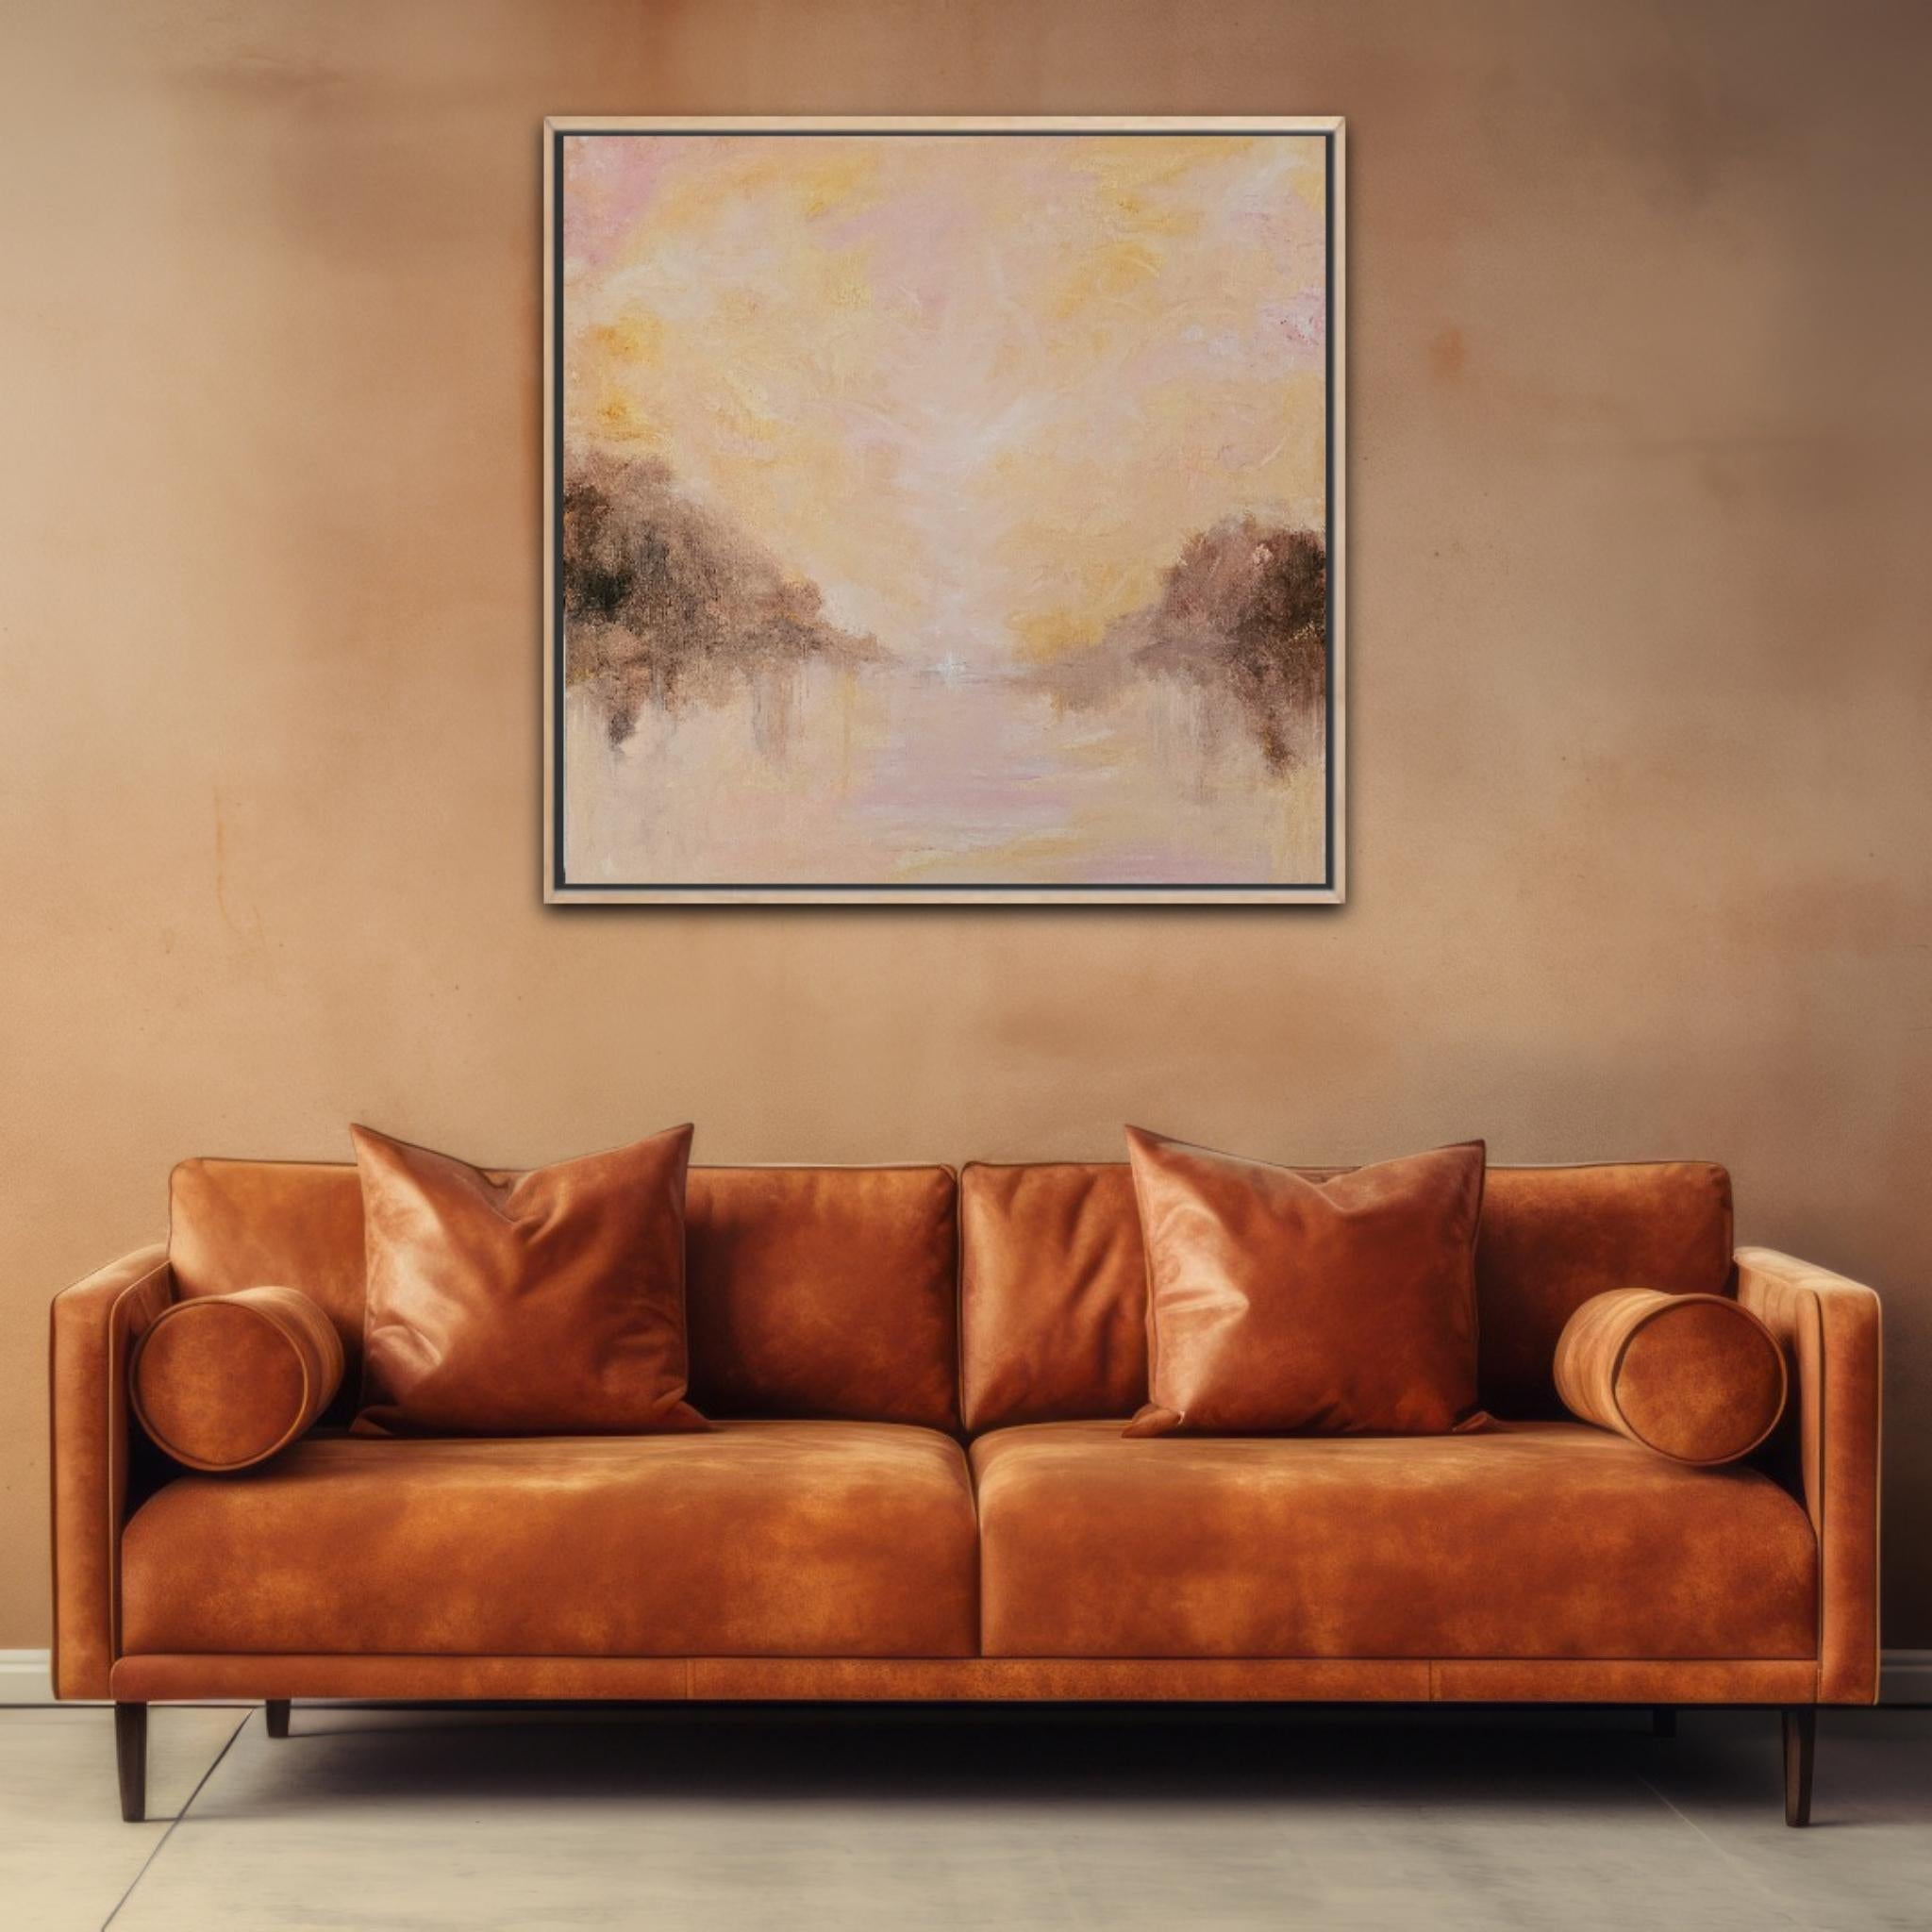 Grand rising - Large peach fuzz color abstract landscape painting For Sale 13